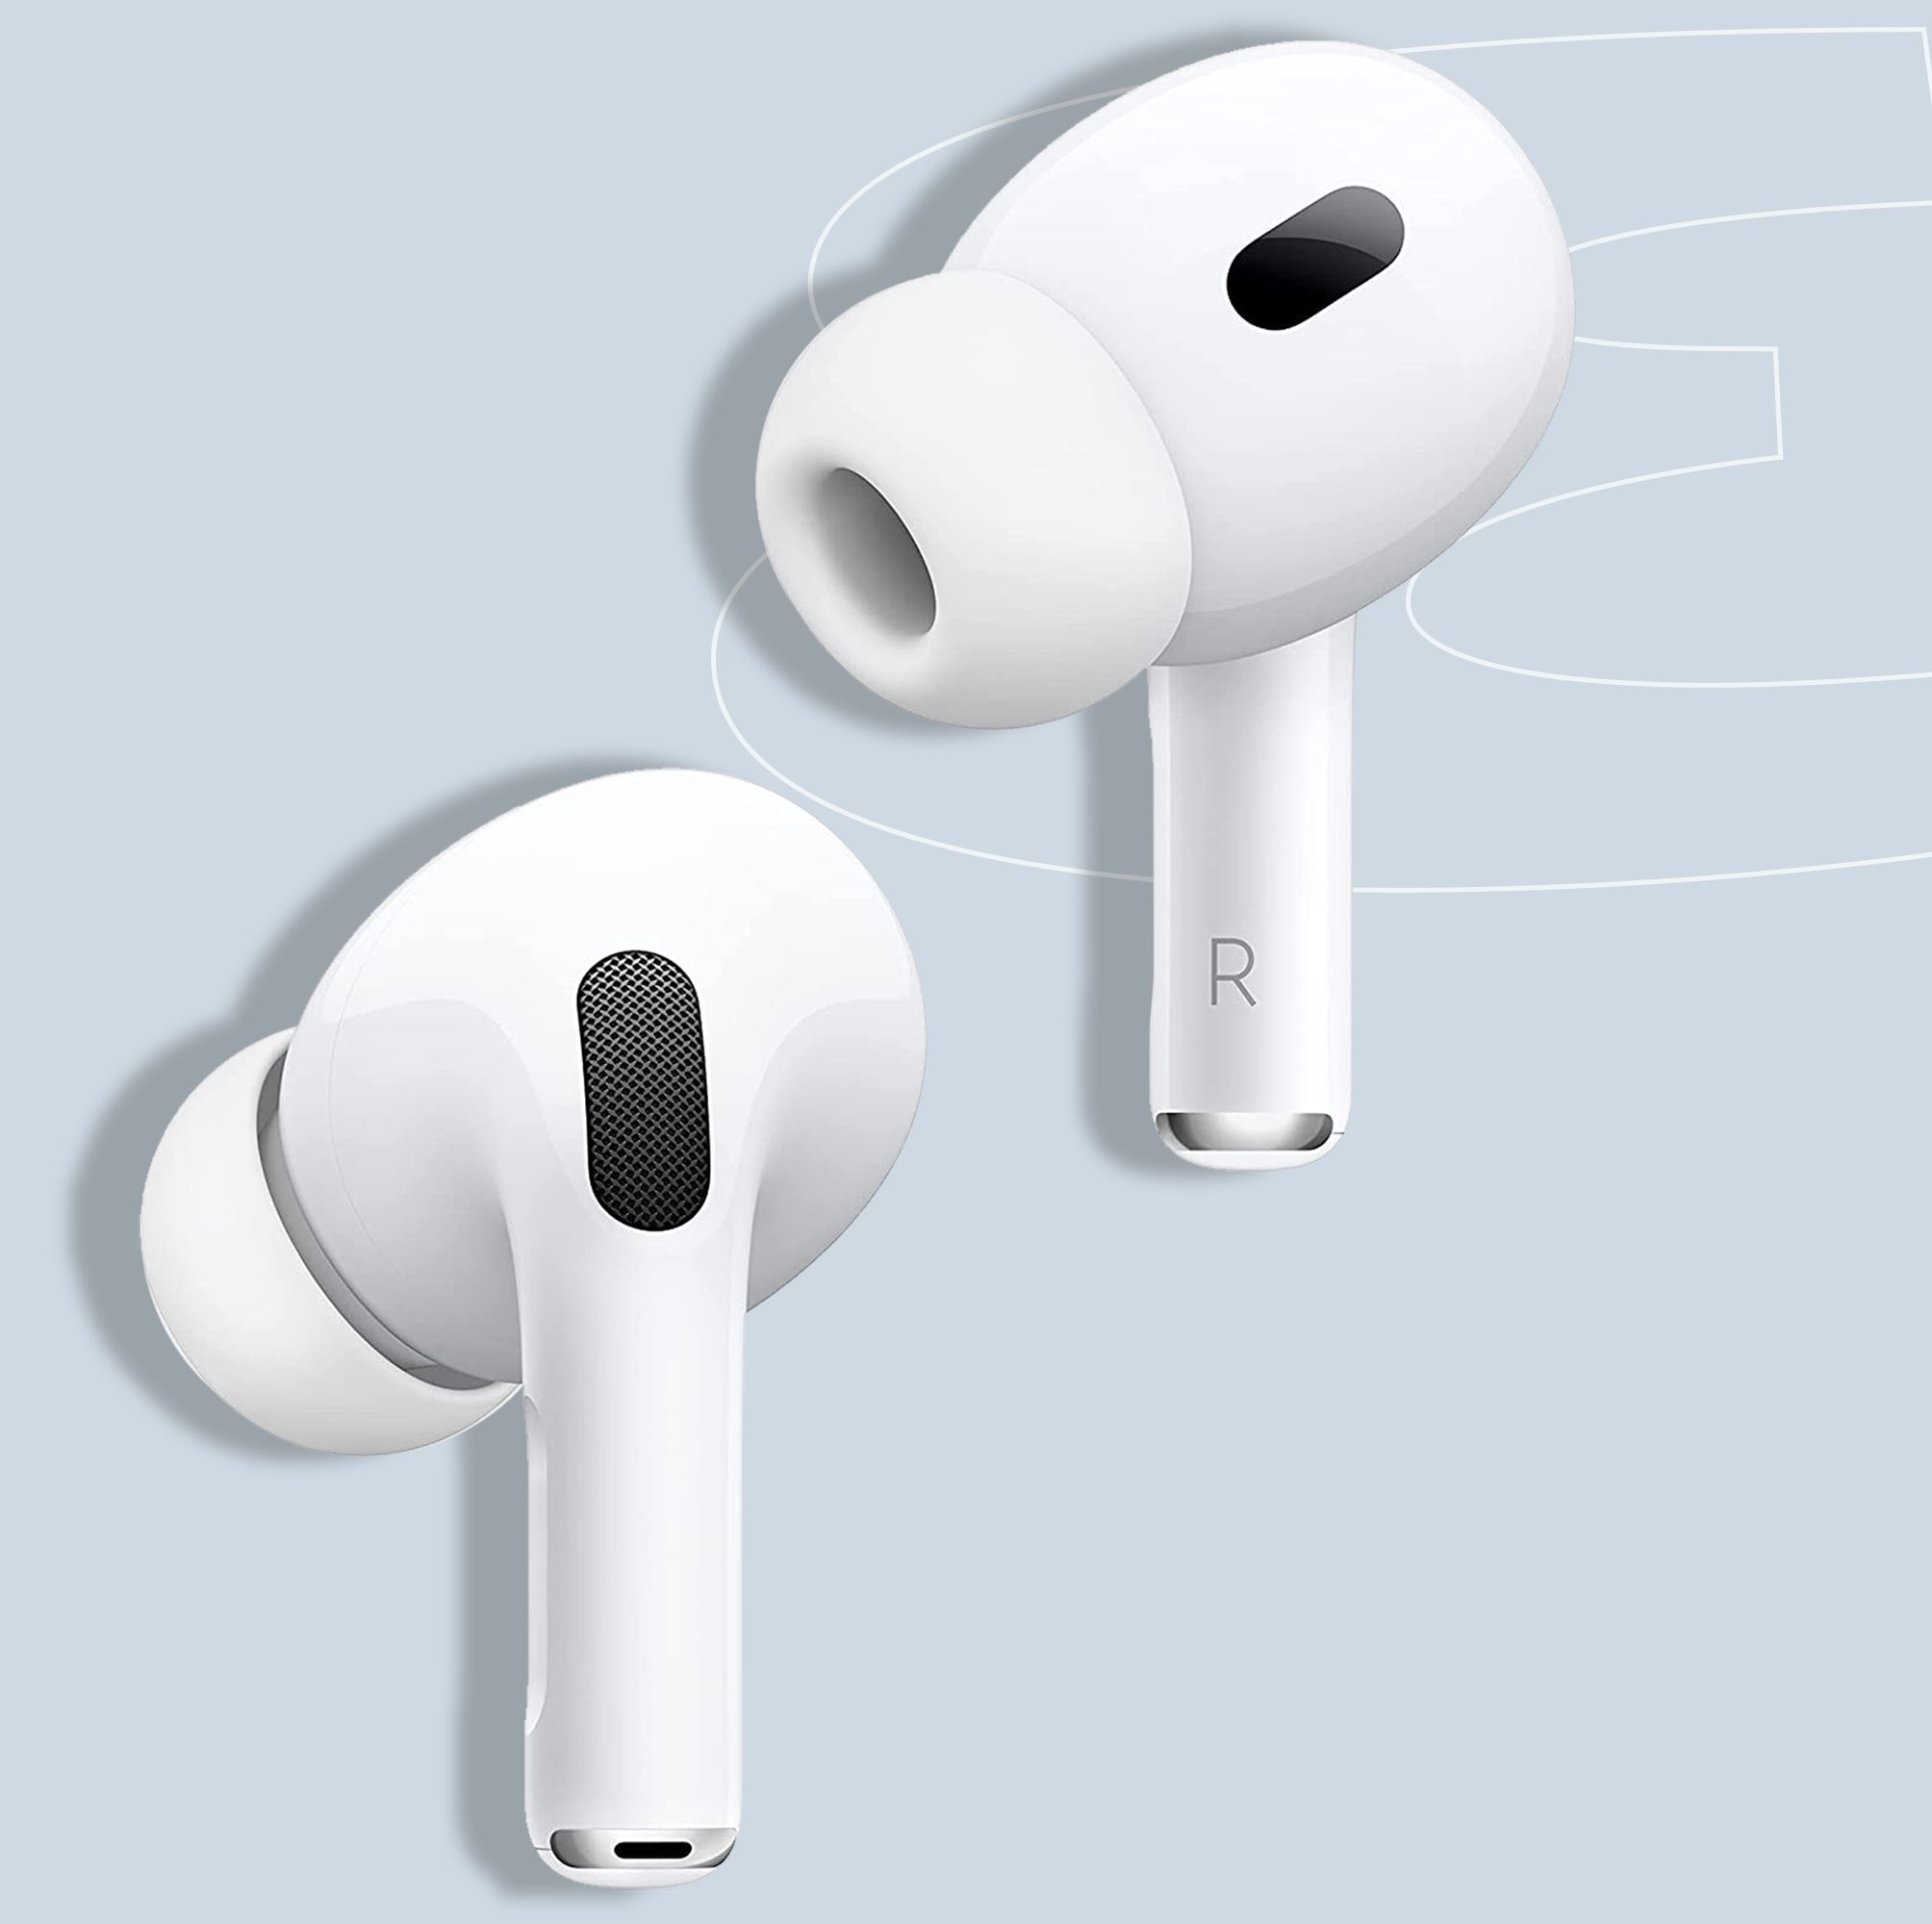 There's Only One Place to Score Airpods Deals This Big Today